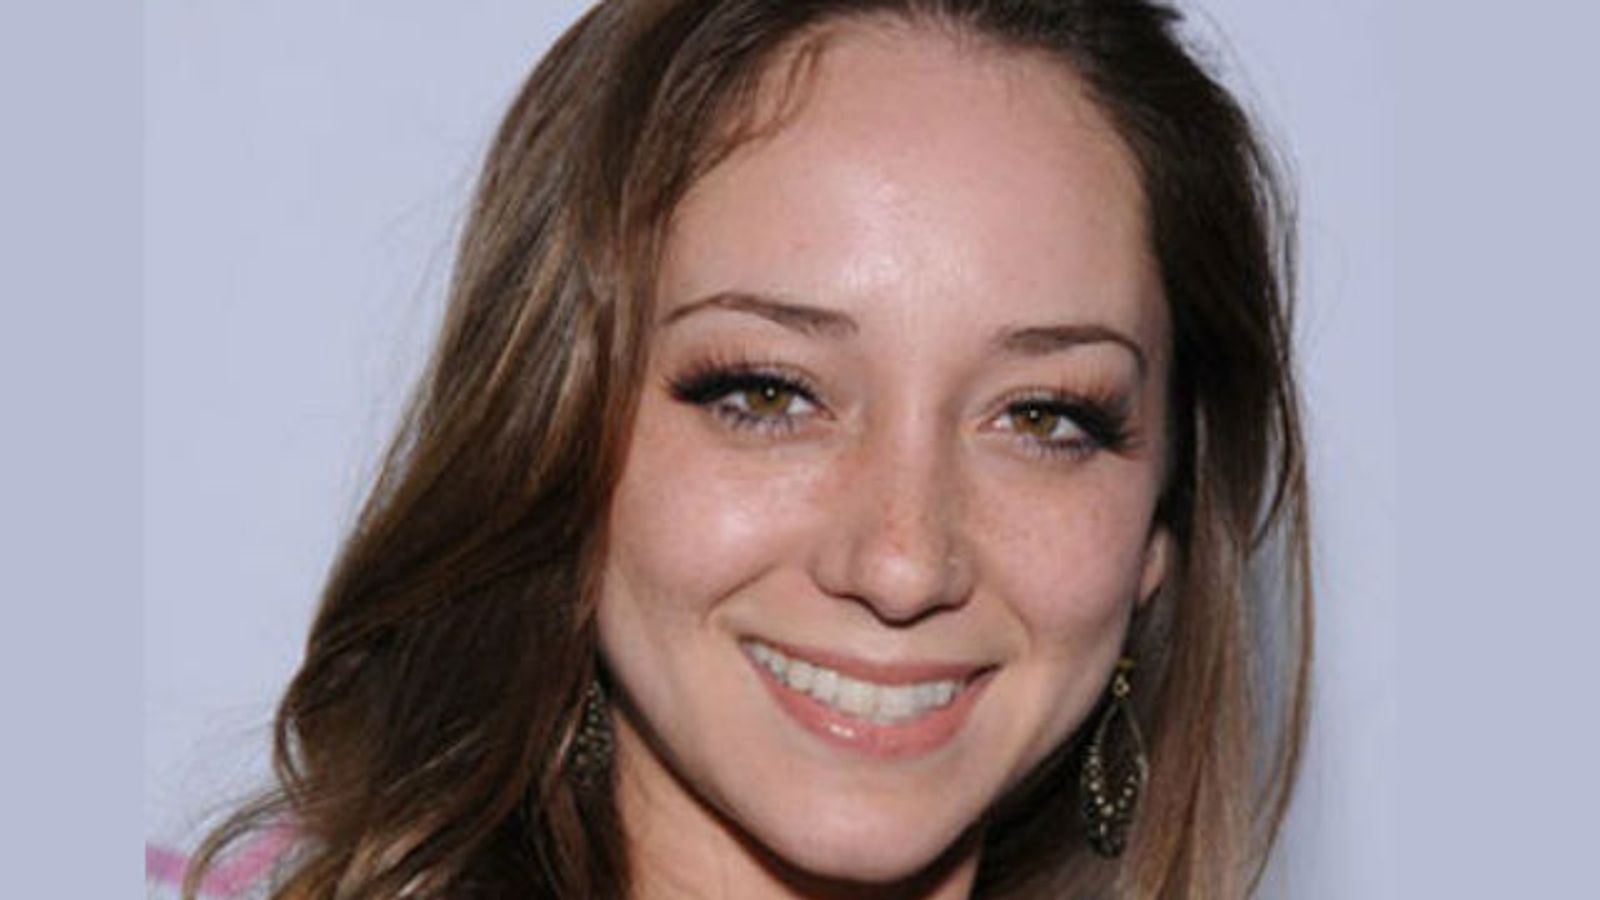 Remy LaCroix About to Get #’ed Once Again